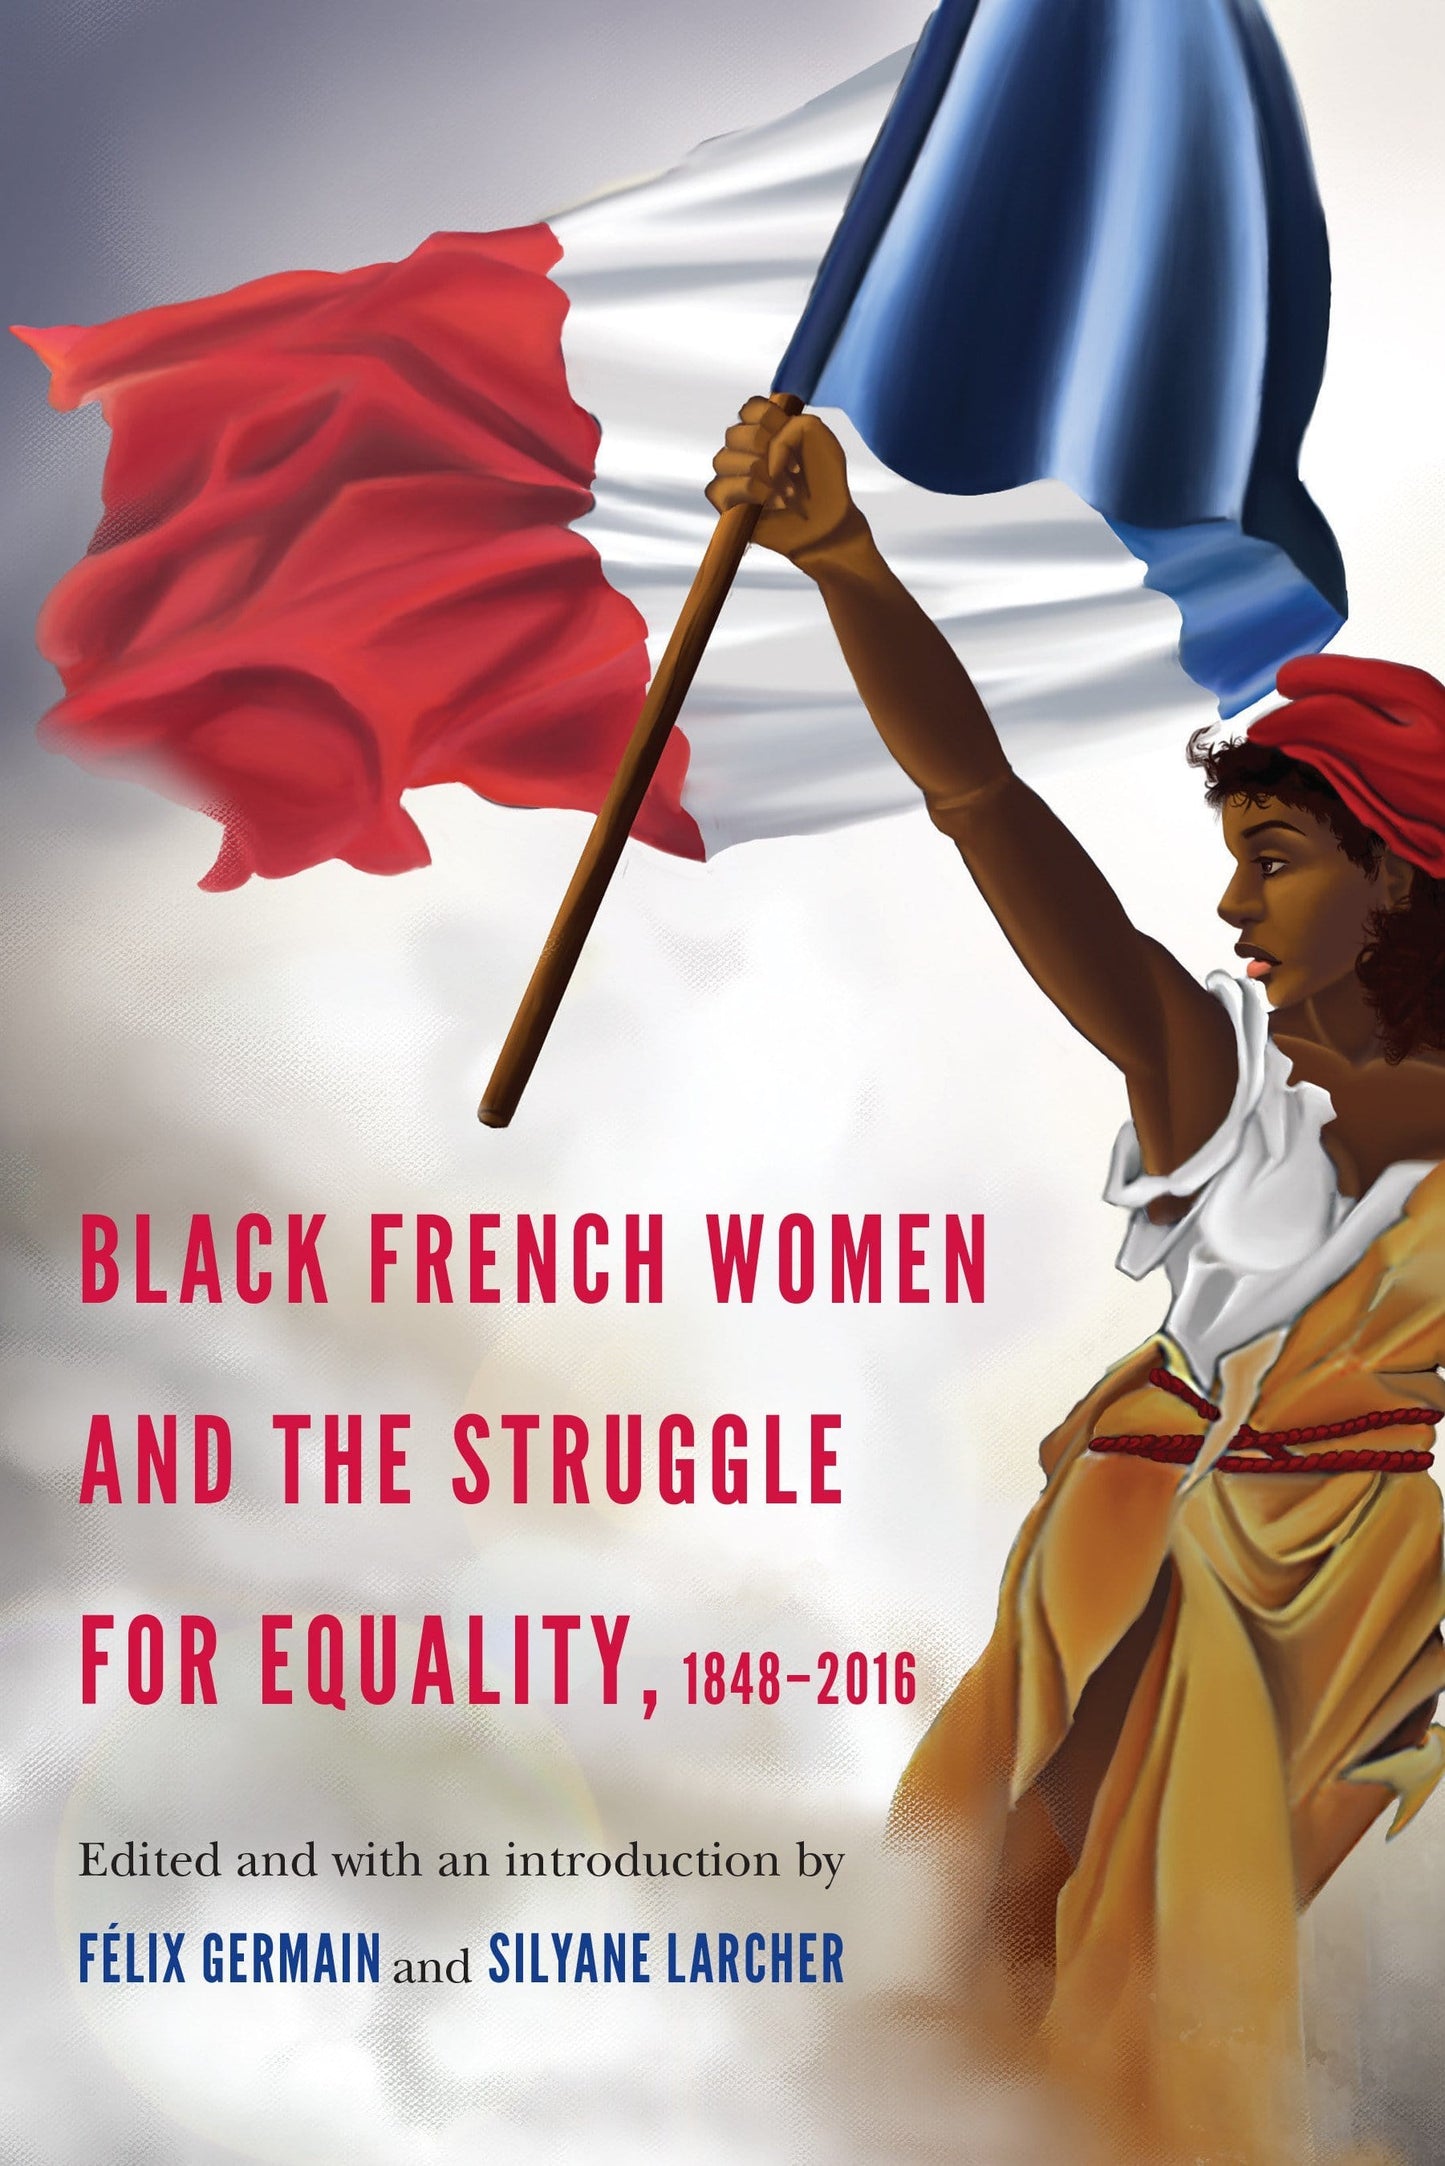 LibrairieRacines Black French Women and the Struggle for Equality, 1848-2016  Edited by Félix Germain and Silyane Larcher and T. Denean Sharpley-Whiting